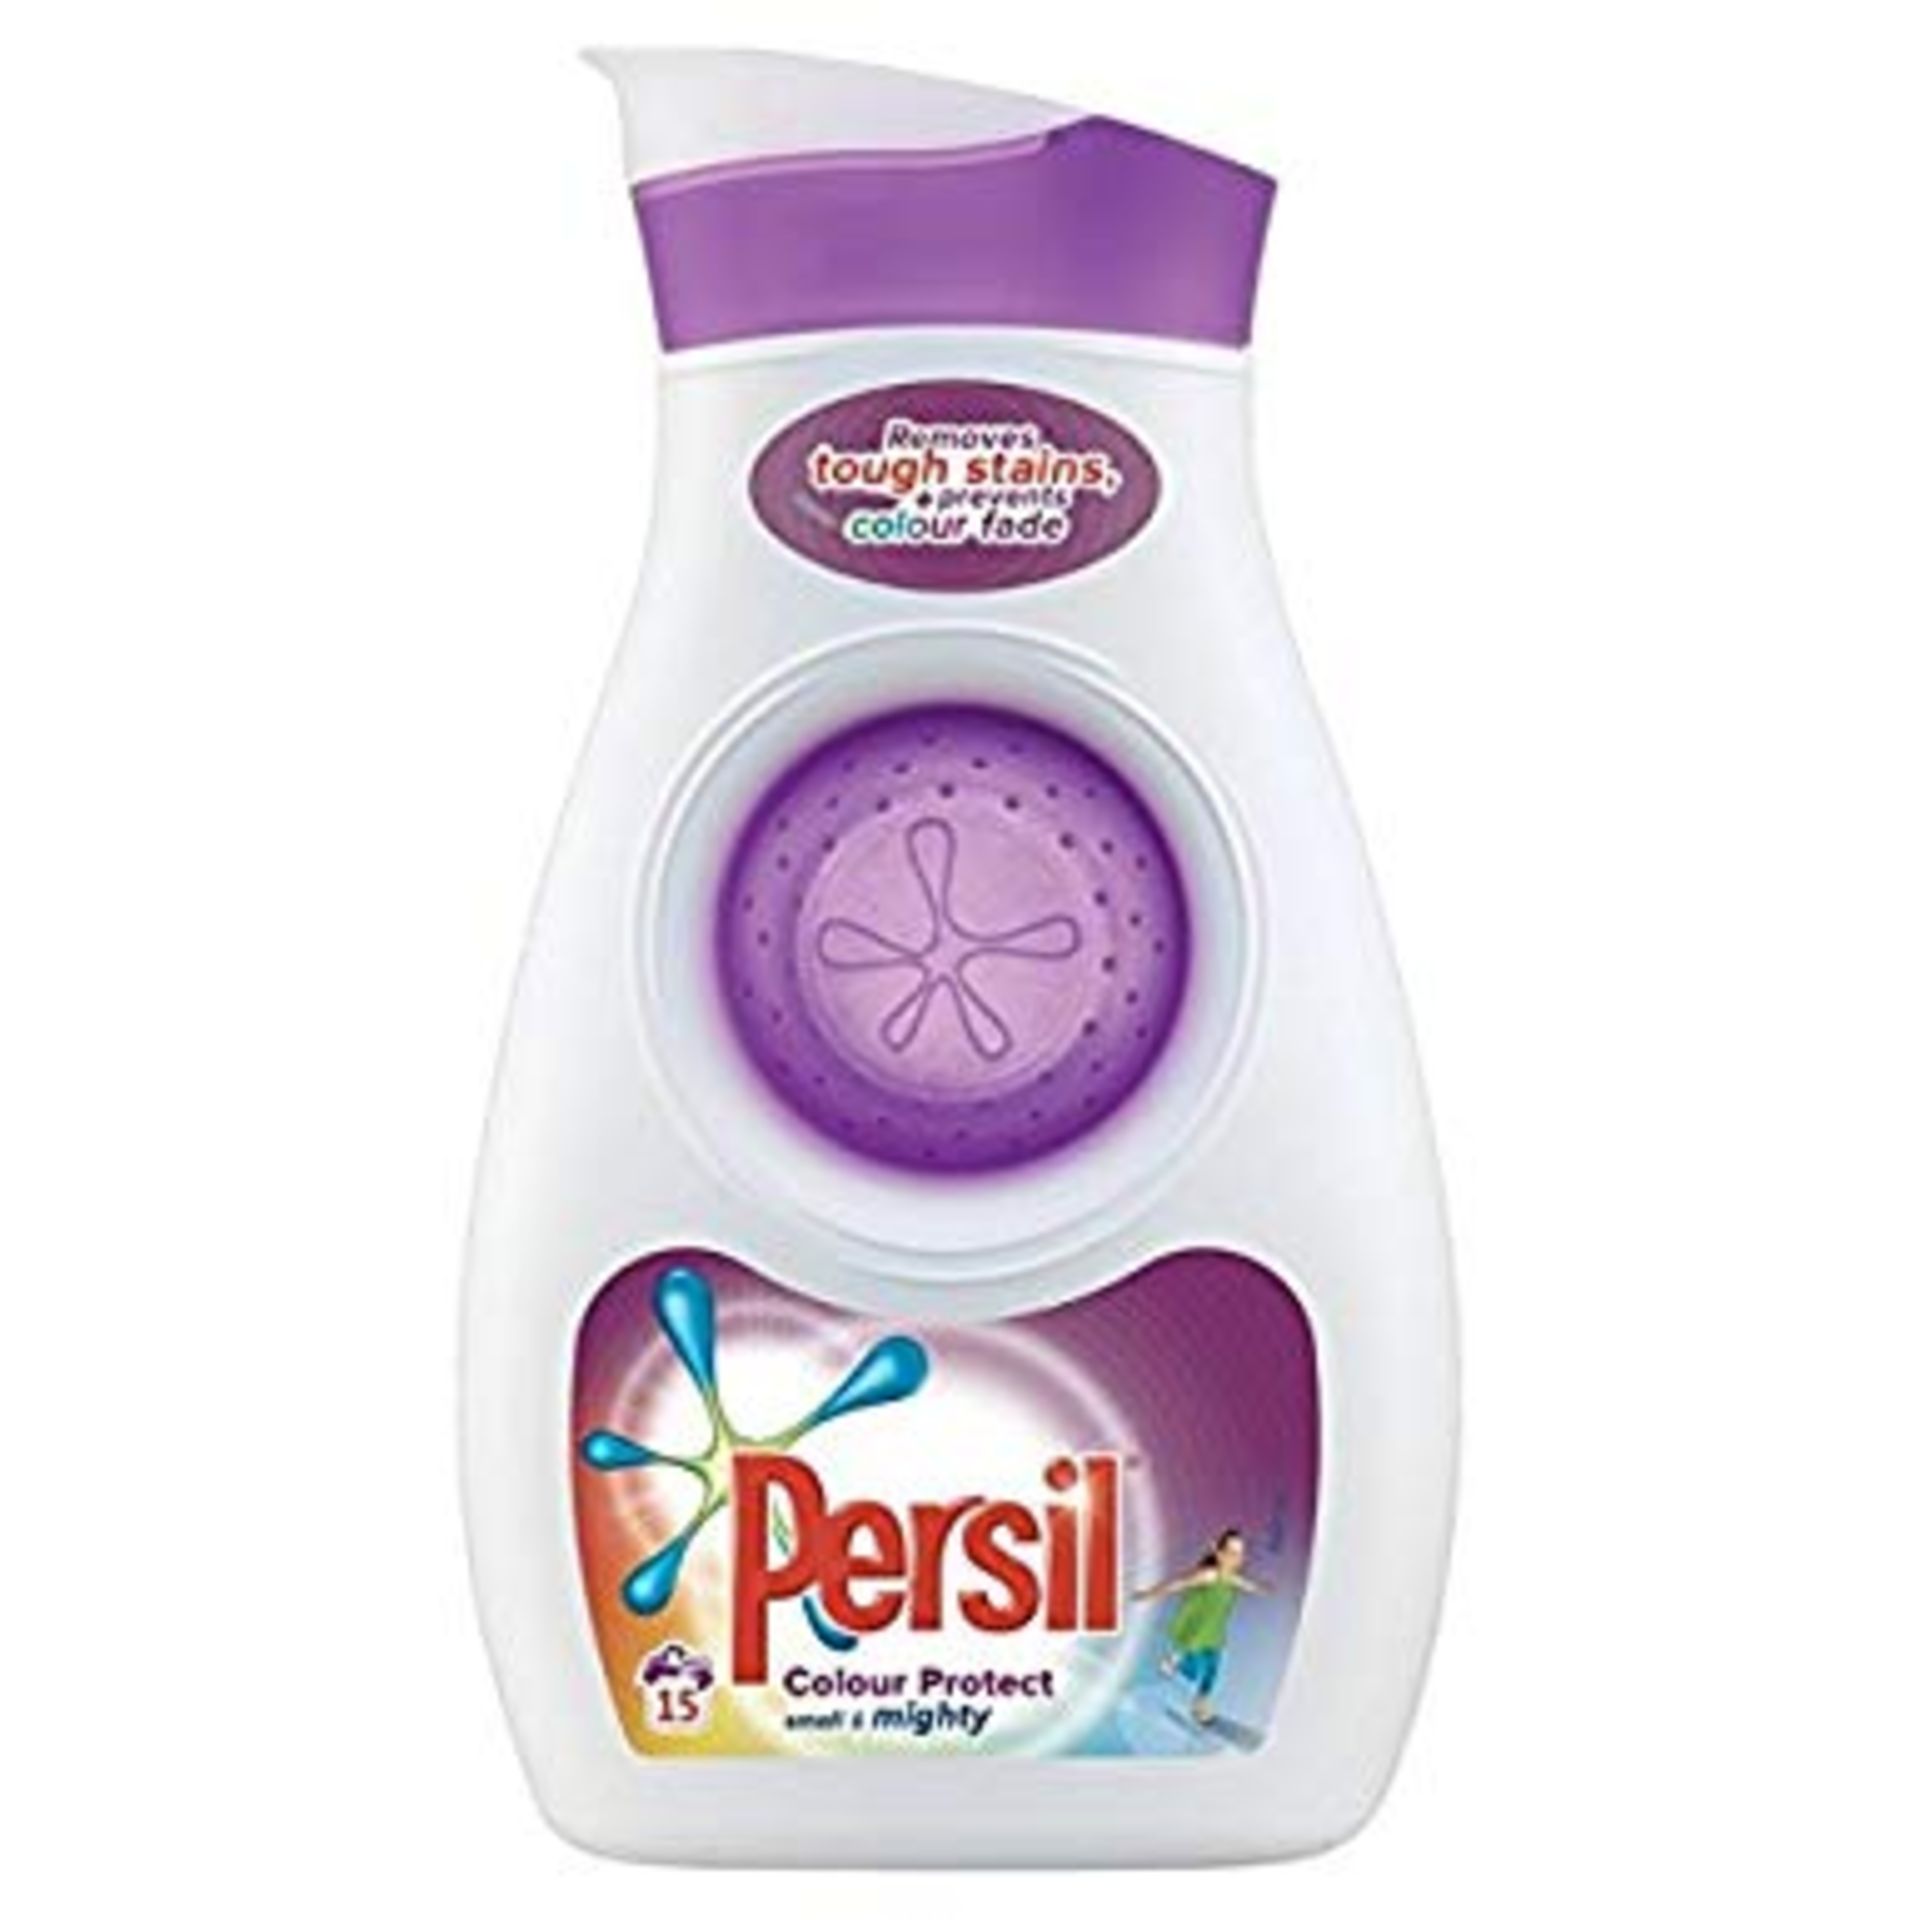 V Brand New Persil Small & Mighty Liquid + Colour And Fibre Care - 15 Wash - Tough On Stains